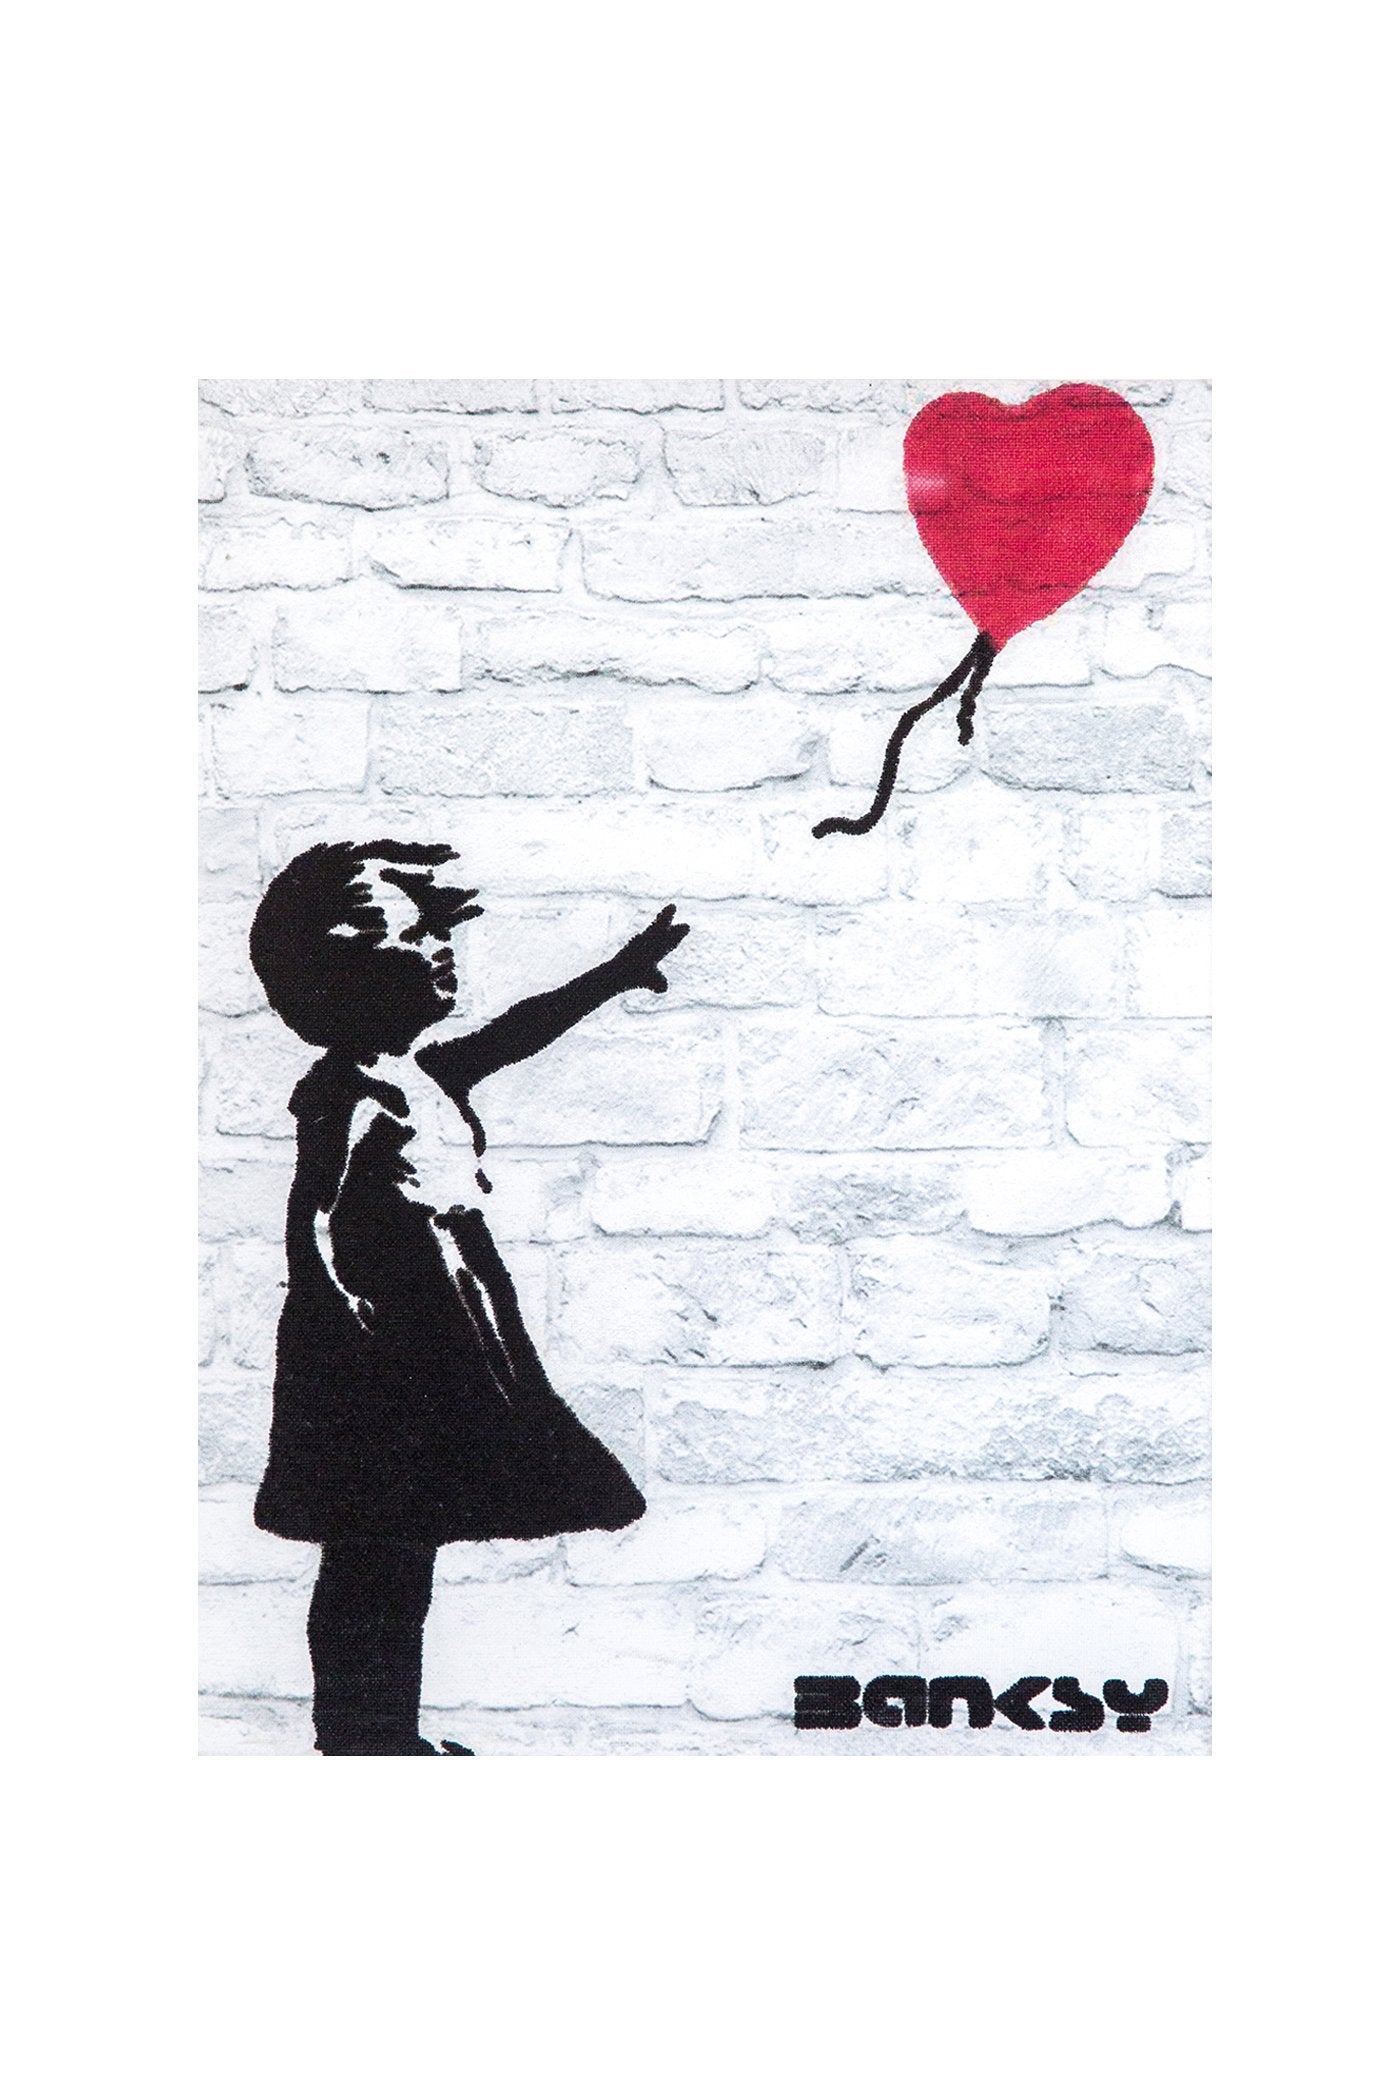 Banksy: Girl with Balloon  poster edition